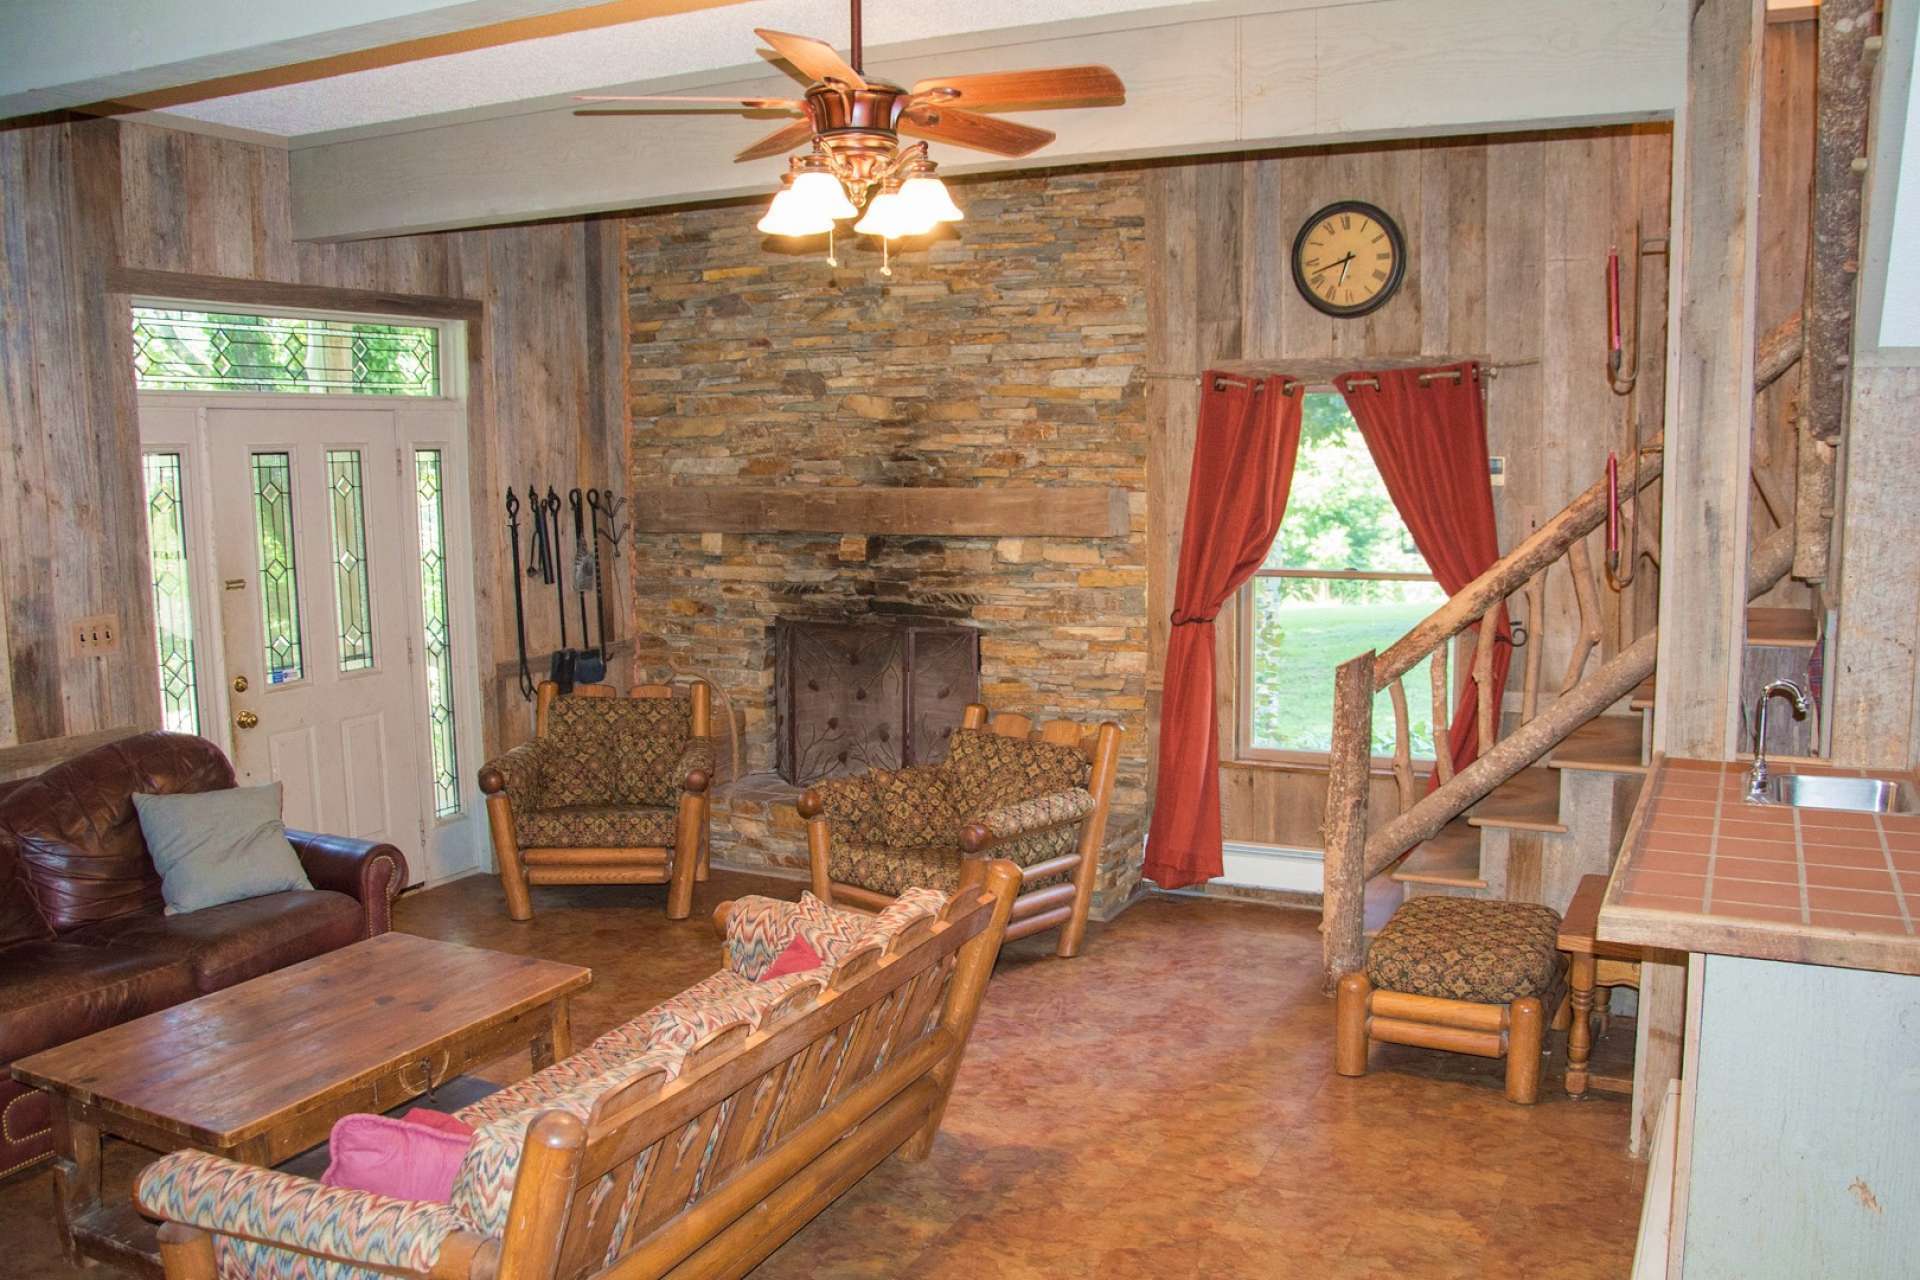 A spacious family room features barn wood accents, stone wood-burning fireplace, and a wet bar for those family gatherings.